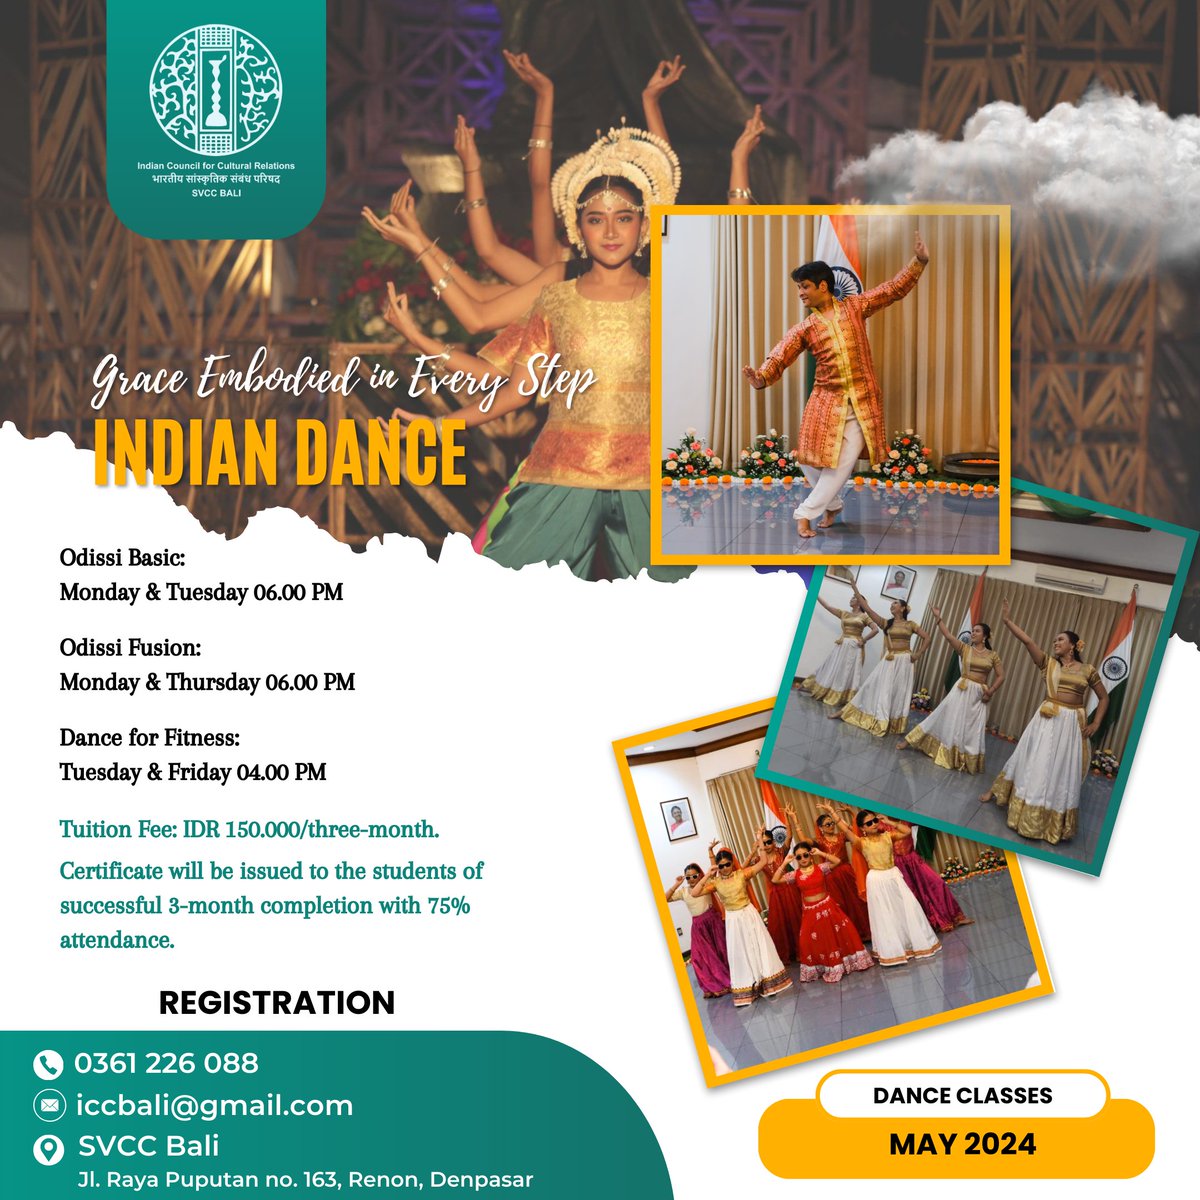 Schedule for Indian dance classes in May!! Let's register and experience authentic Indian Dance by our dance teacher Mr. Pravata Kumar Swain.